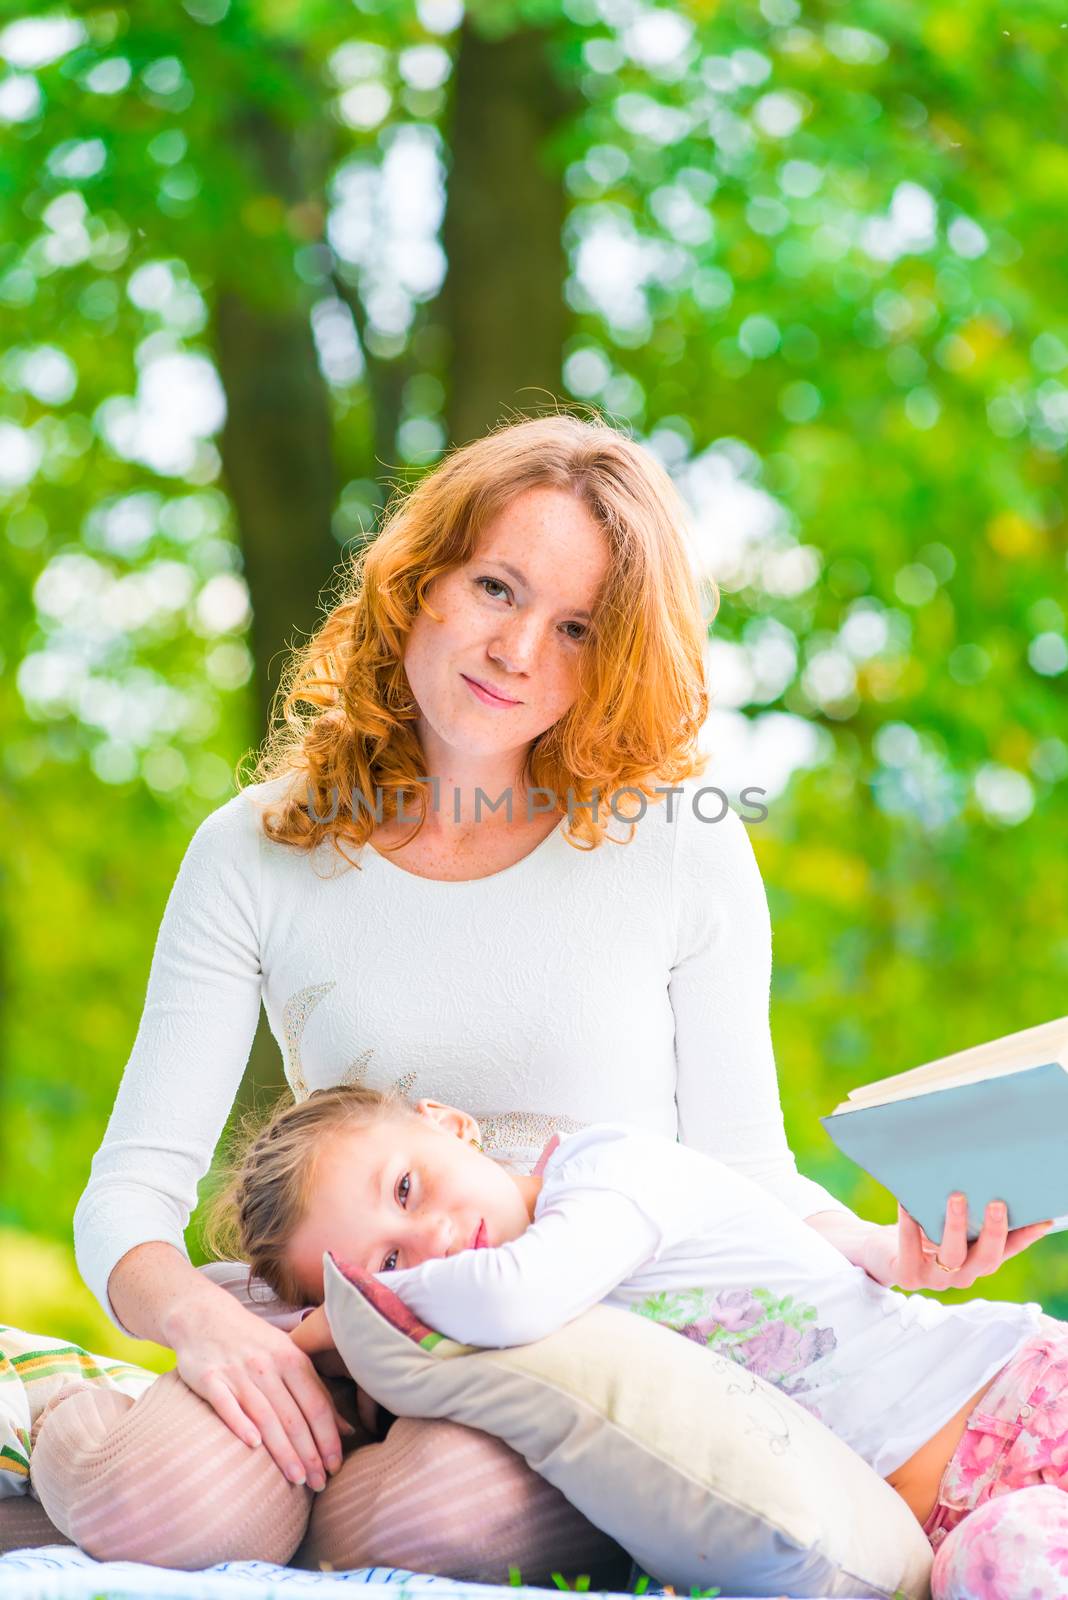 Vertical portrait of a mother and daughter in the park